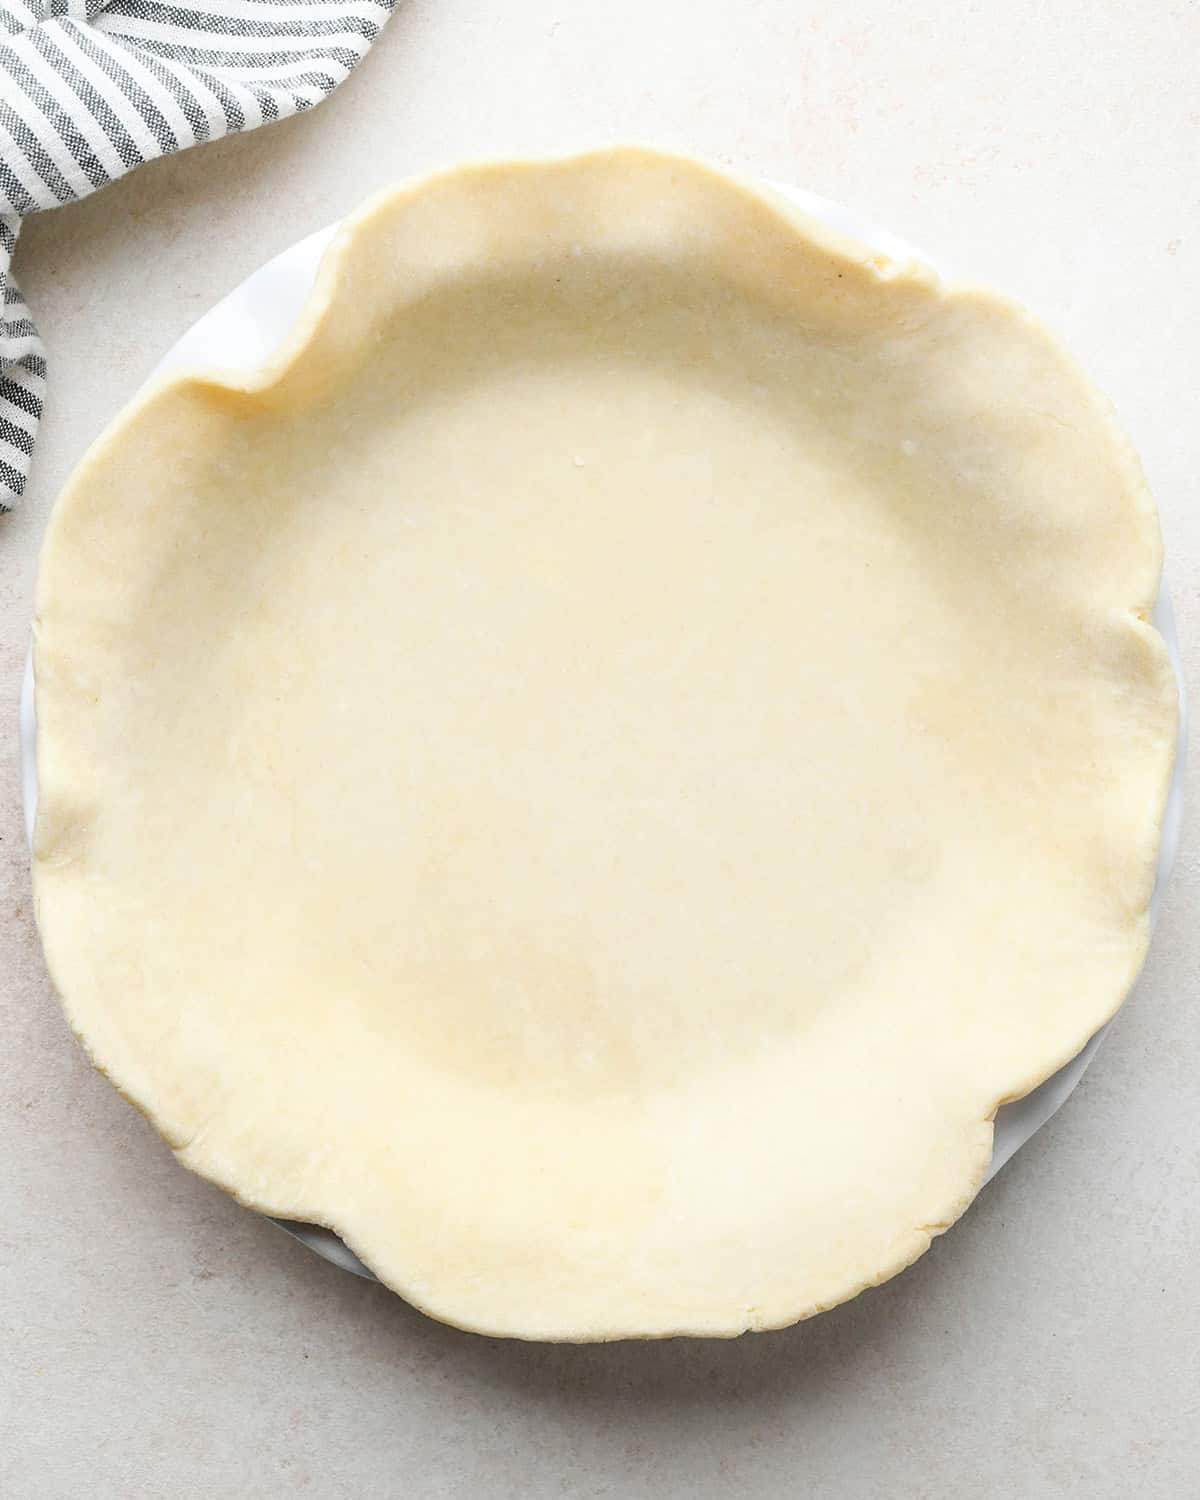 quiche crust rolled out into a circle inside a pie dish